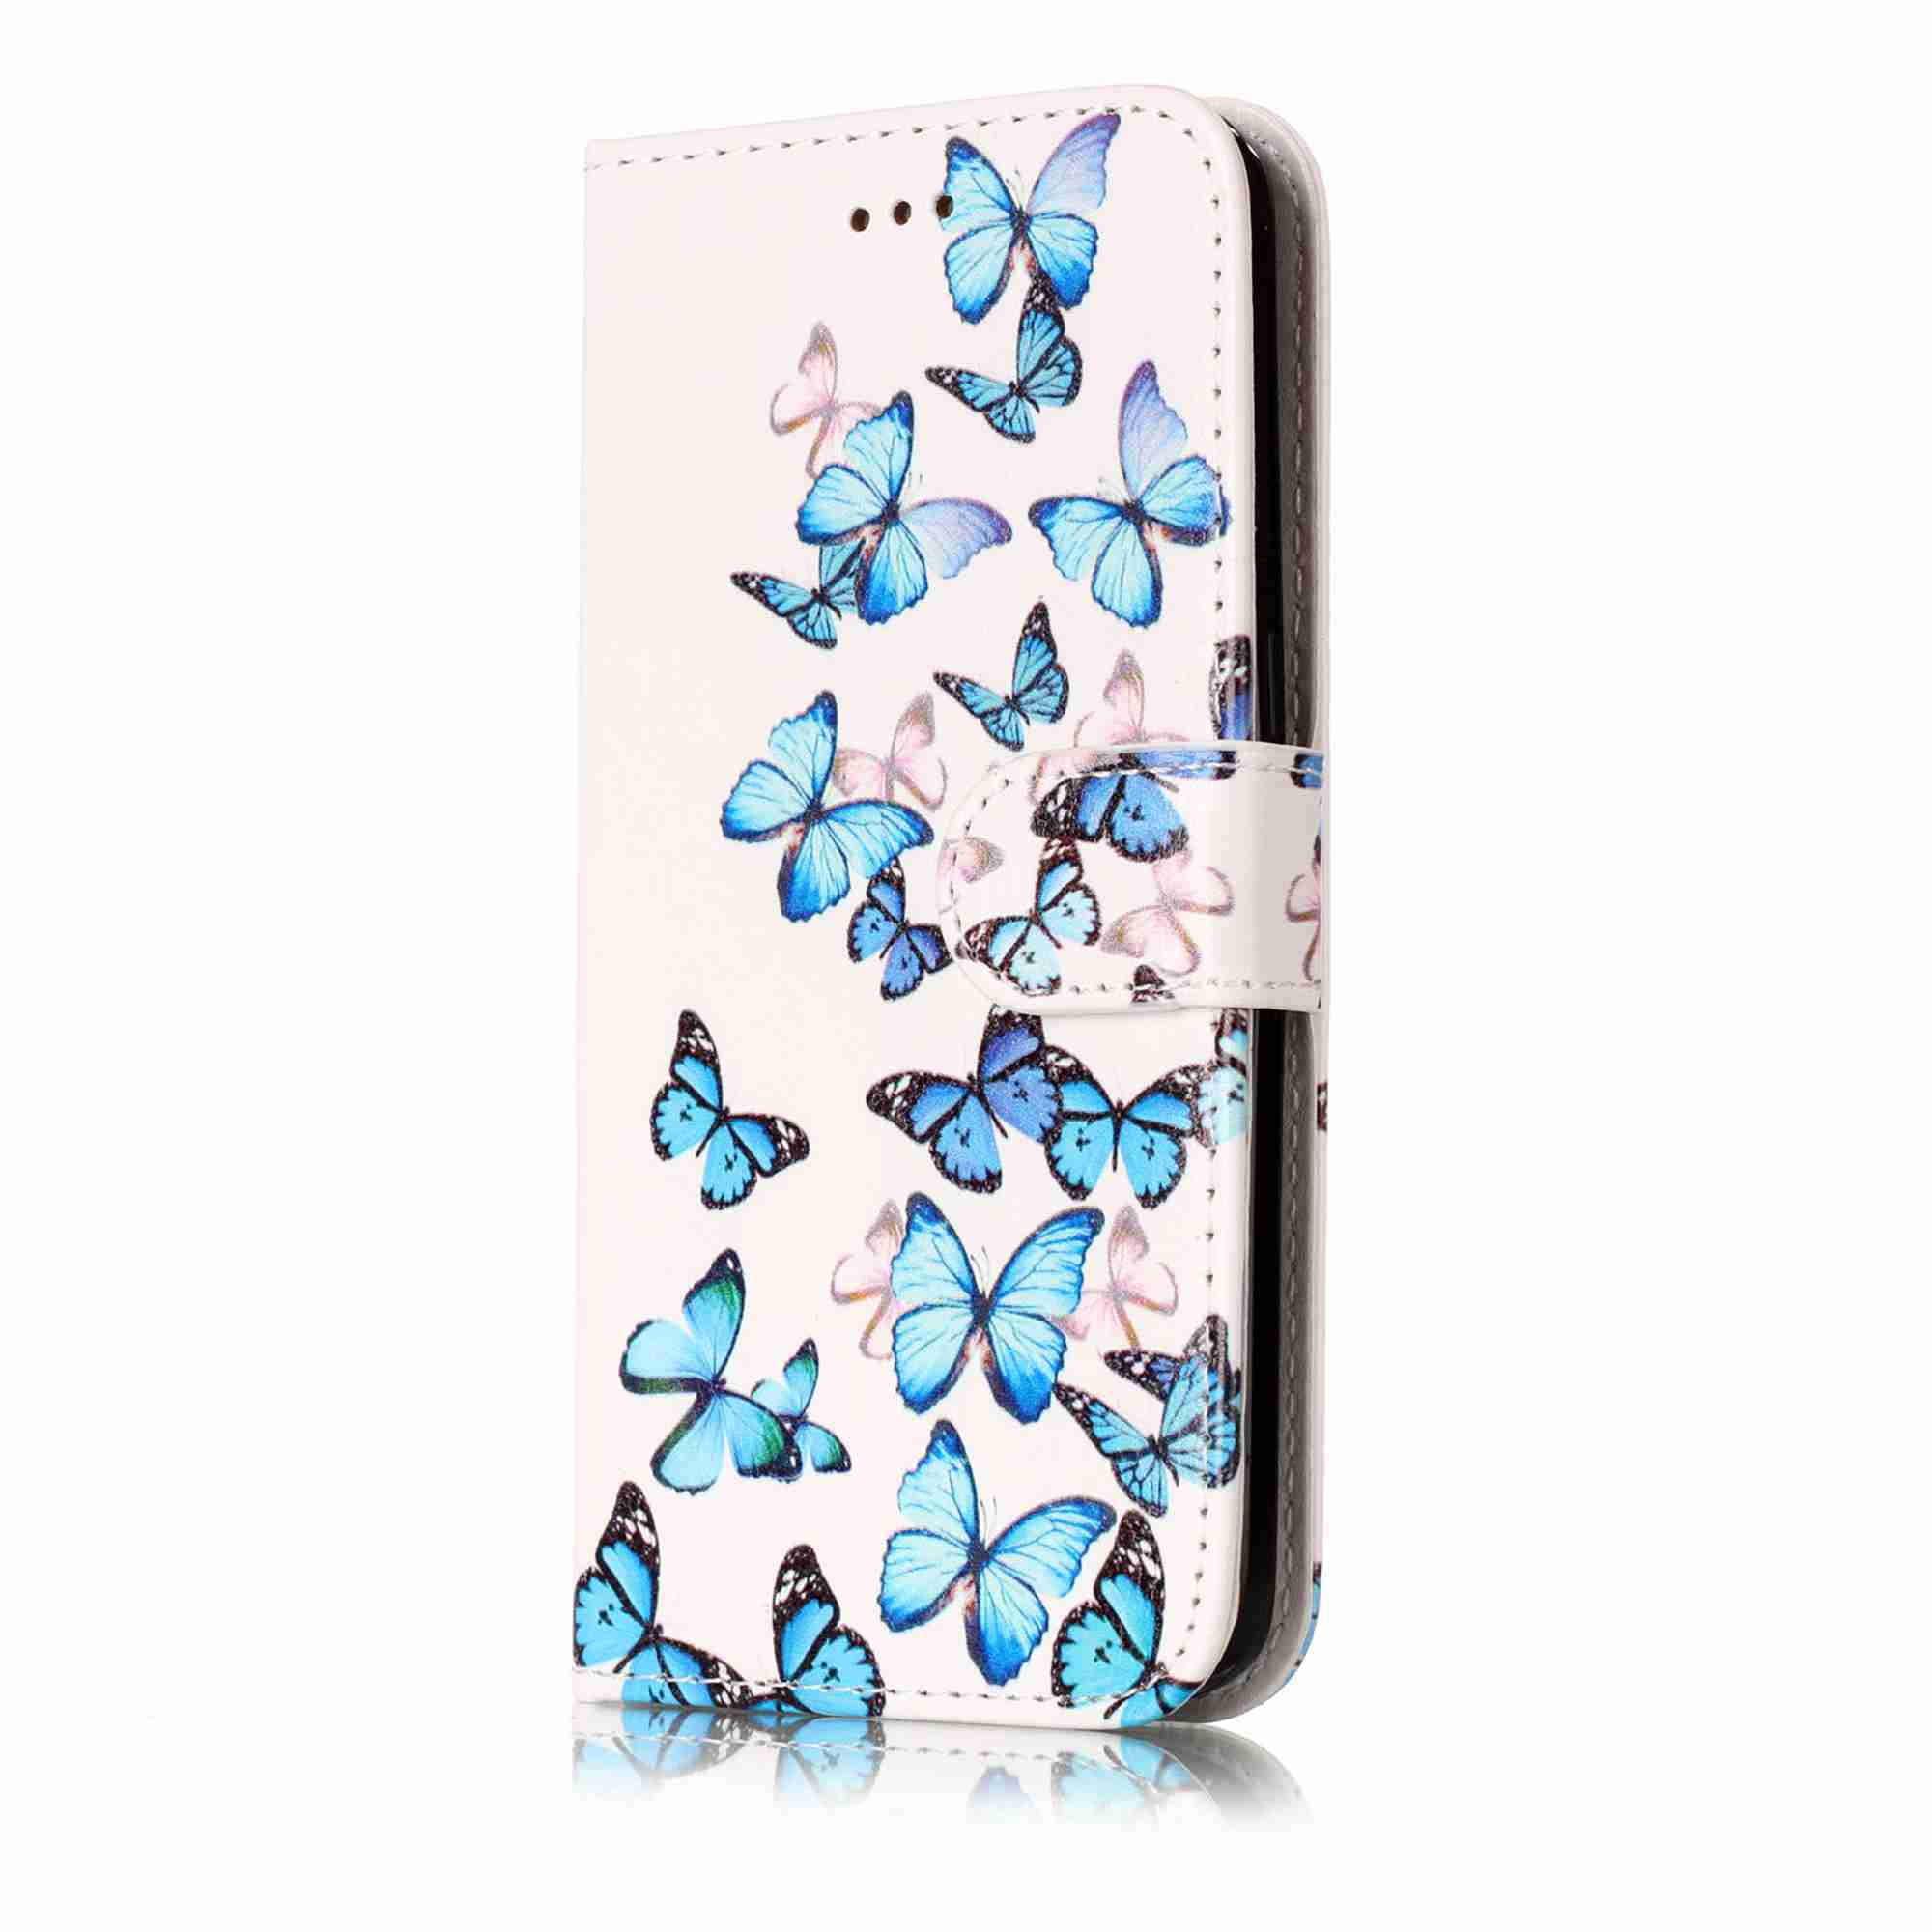 Dteck Case For Samsung Galaxy S6, [Kickstand Feature] Luxury PU Wallet Case Flip Folio Cover with [Card Slots] and [Note Pockets], Butterfly - Walmart.com